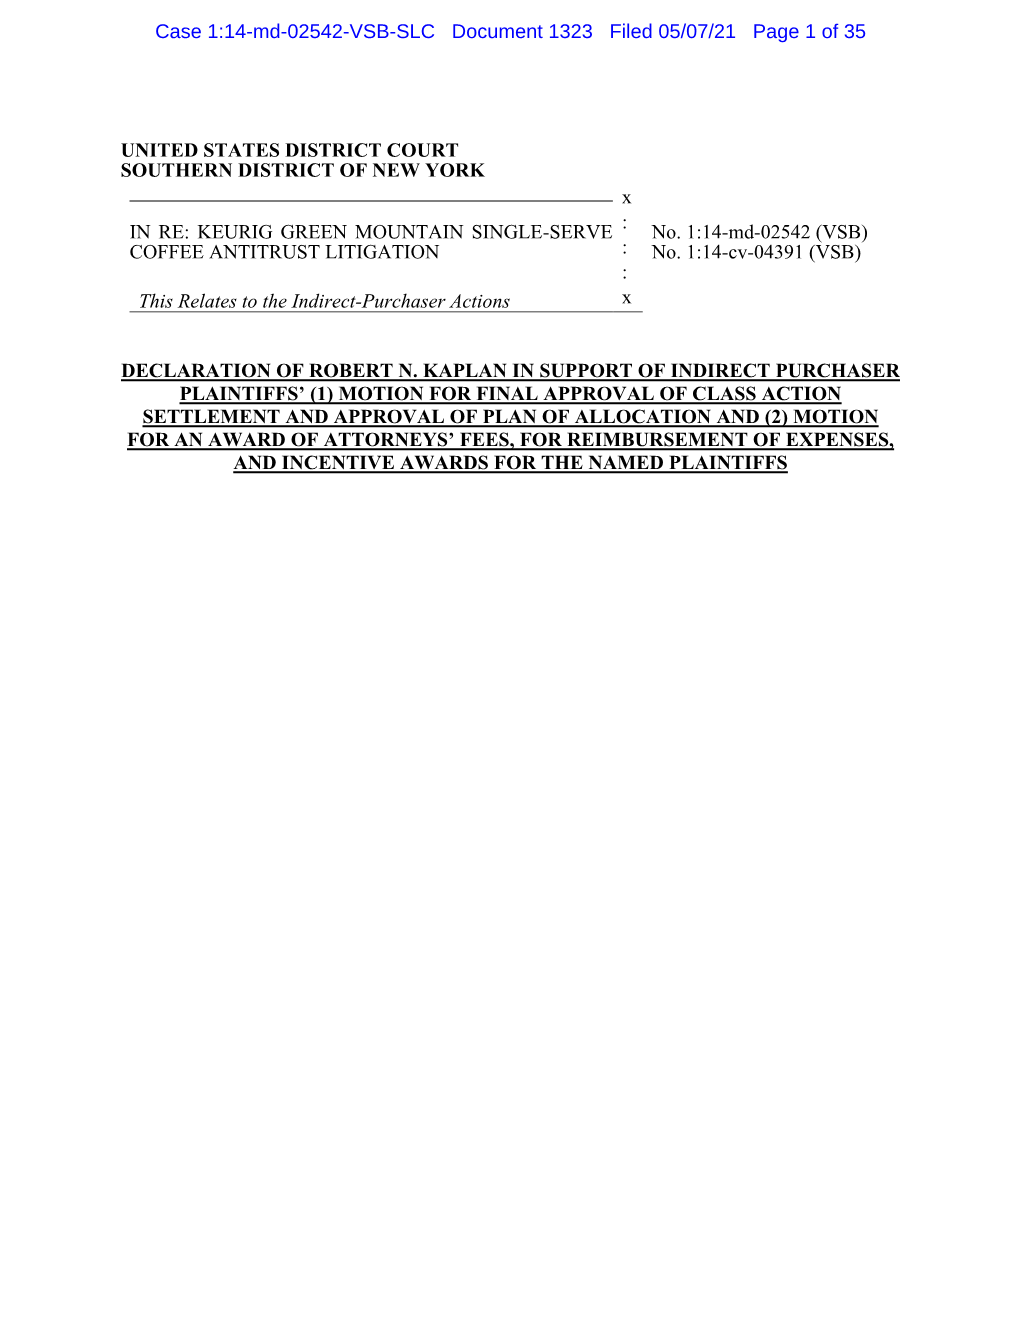 Case 1:14-Md-02542-VSB-SLC Document 1323 Filed 05/07/21 Page 1 of 35